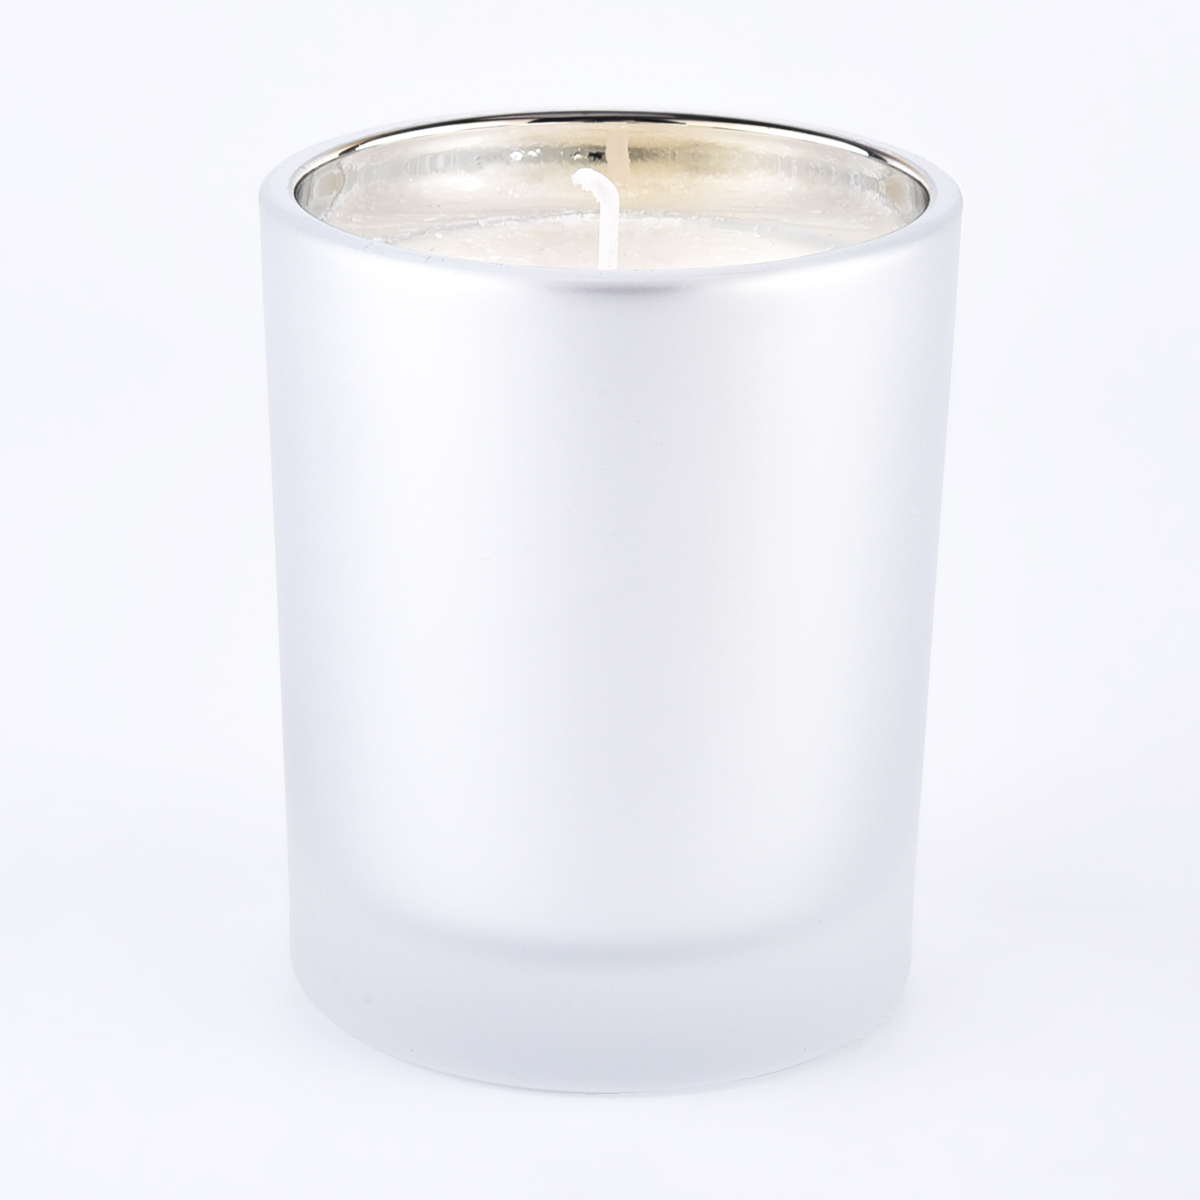 frosted white glass candle jar with metallic silver inside 8 oz